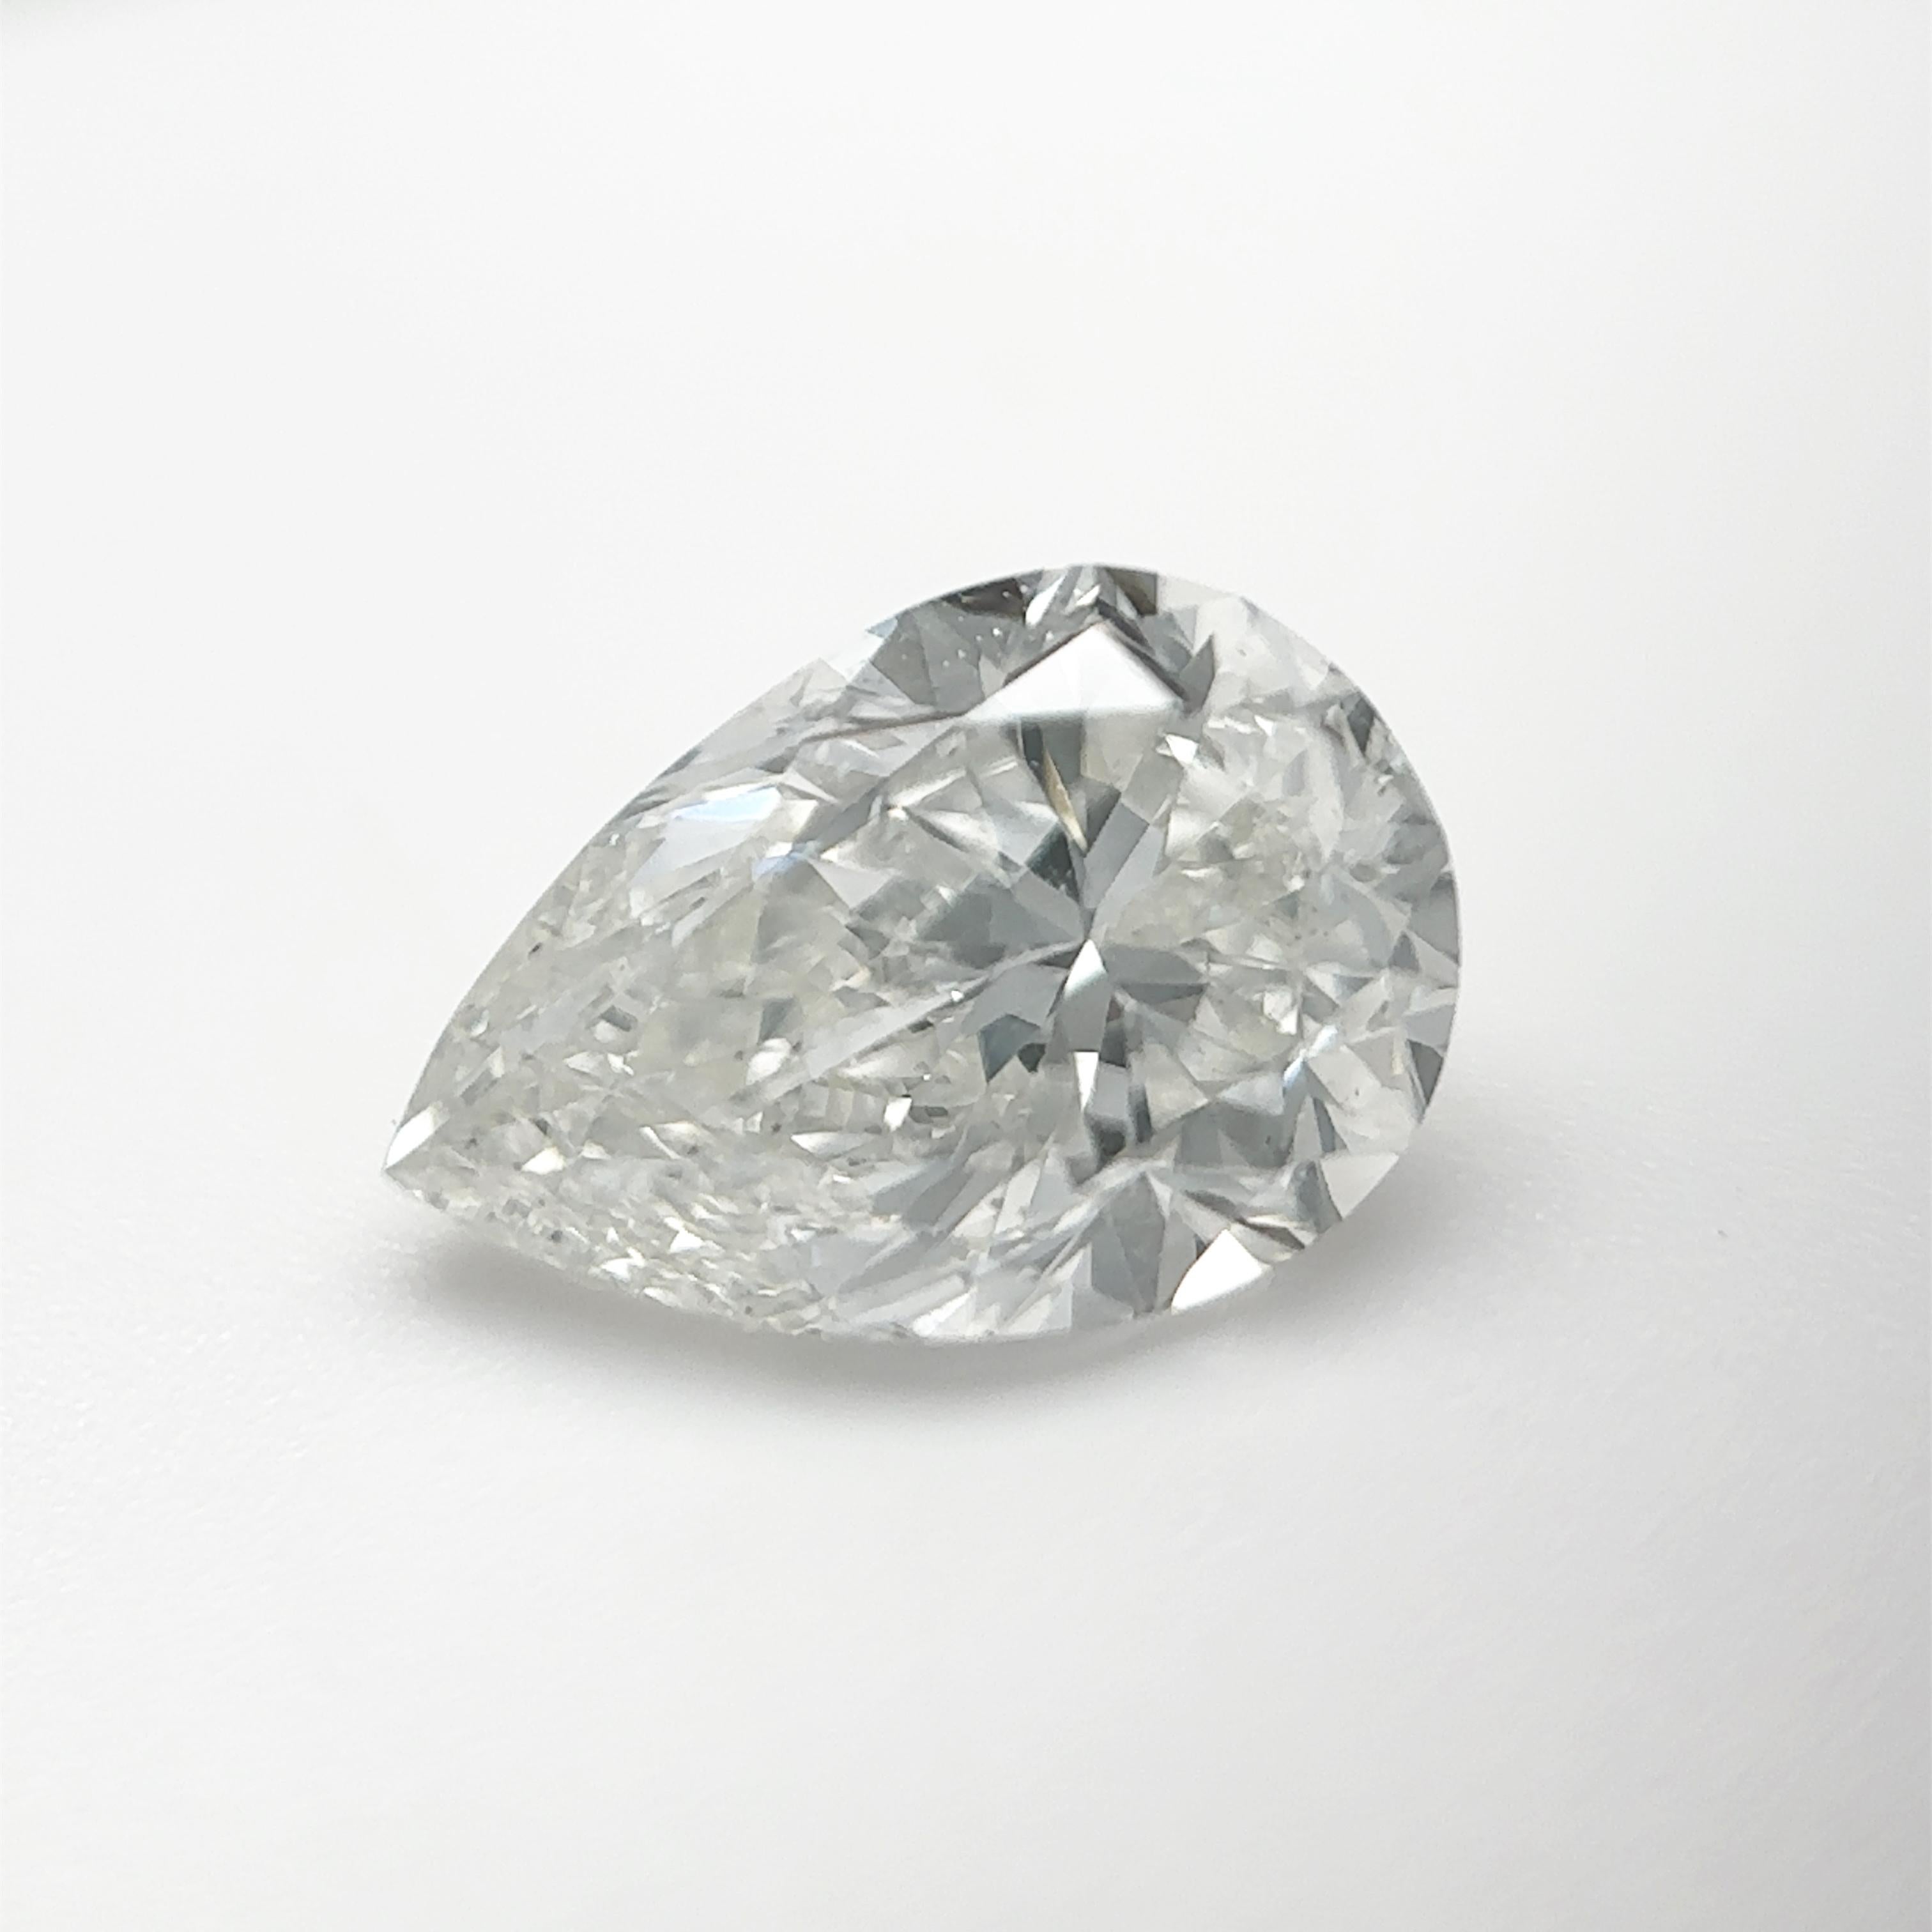 GIA Certified 2.01 Carat Pear Brilliant Natural Diamond Loose stone (Customization Option)

Color: H
Clarity: SI2

Ideal for engagement rings, wedding bands, diamond necklaces and diamond earrings. Get in touch with us to customise your jewellery!